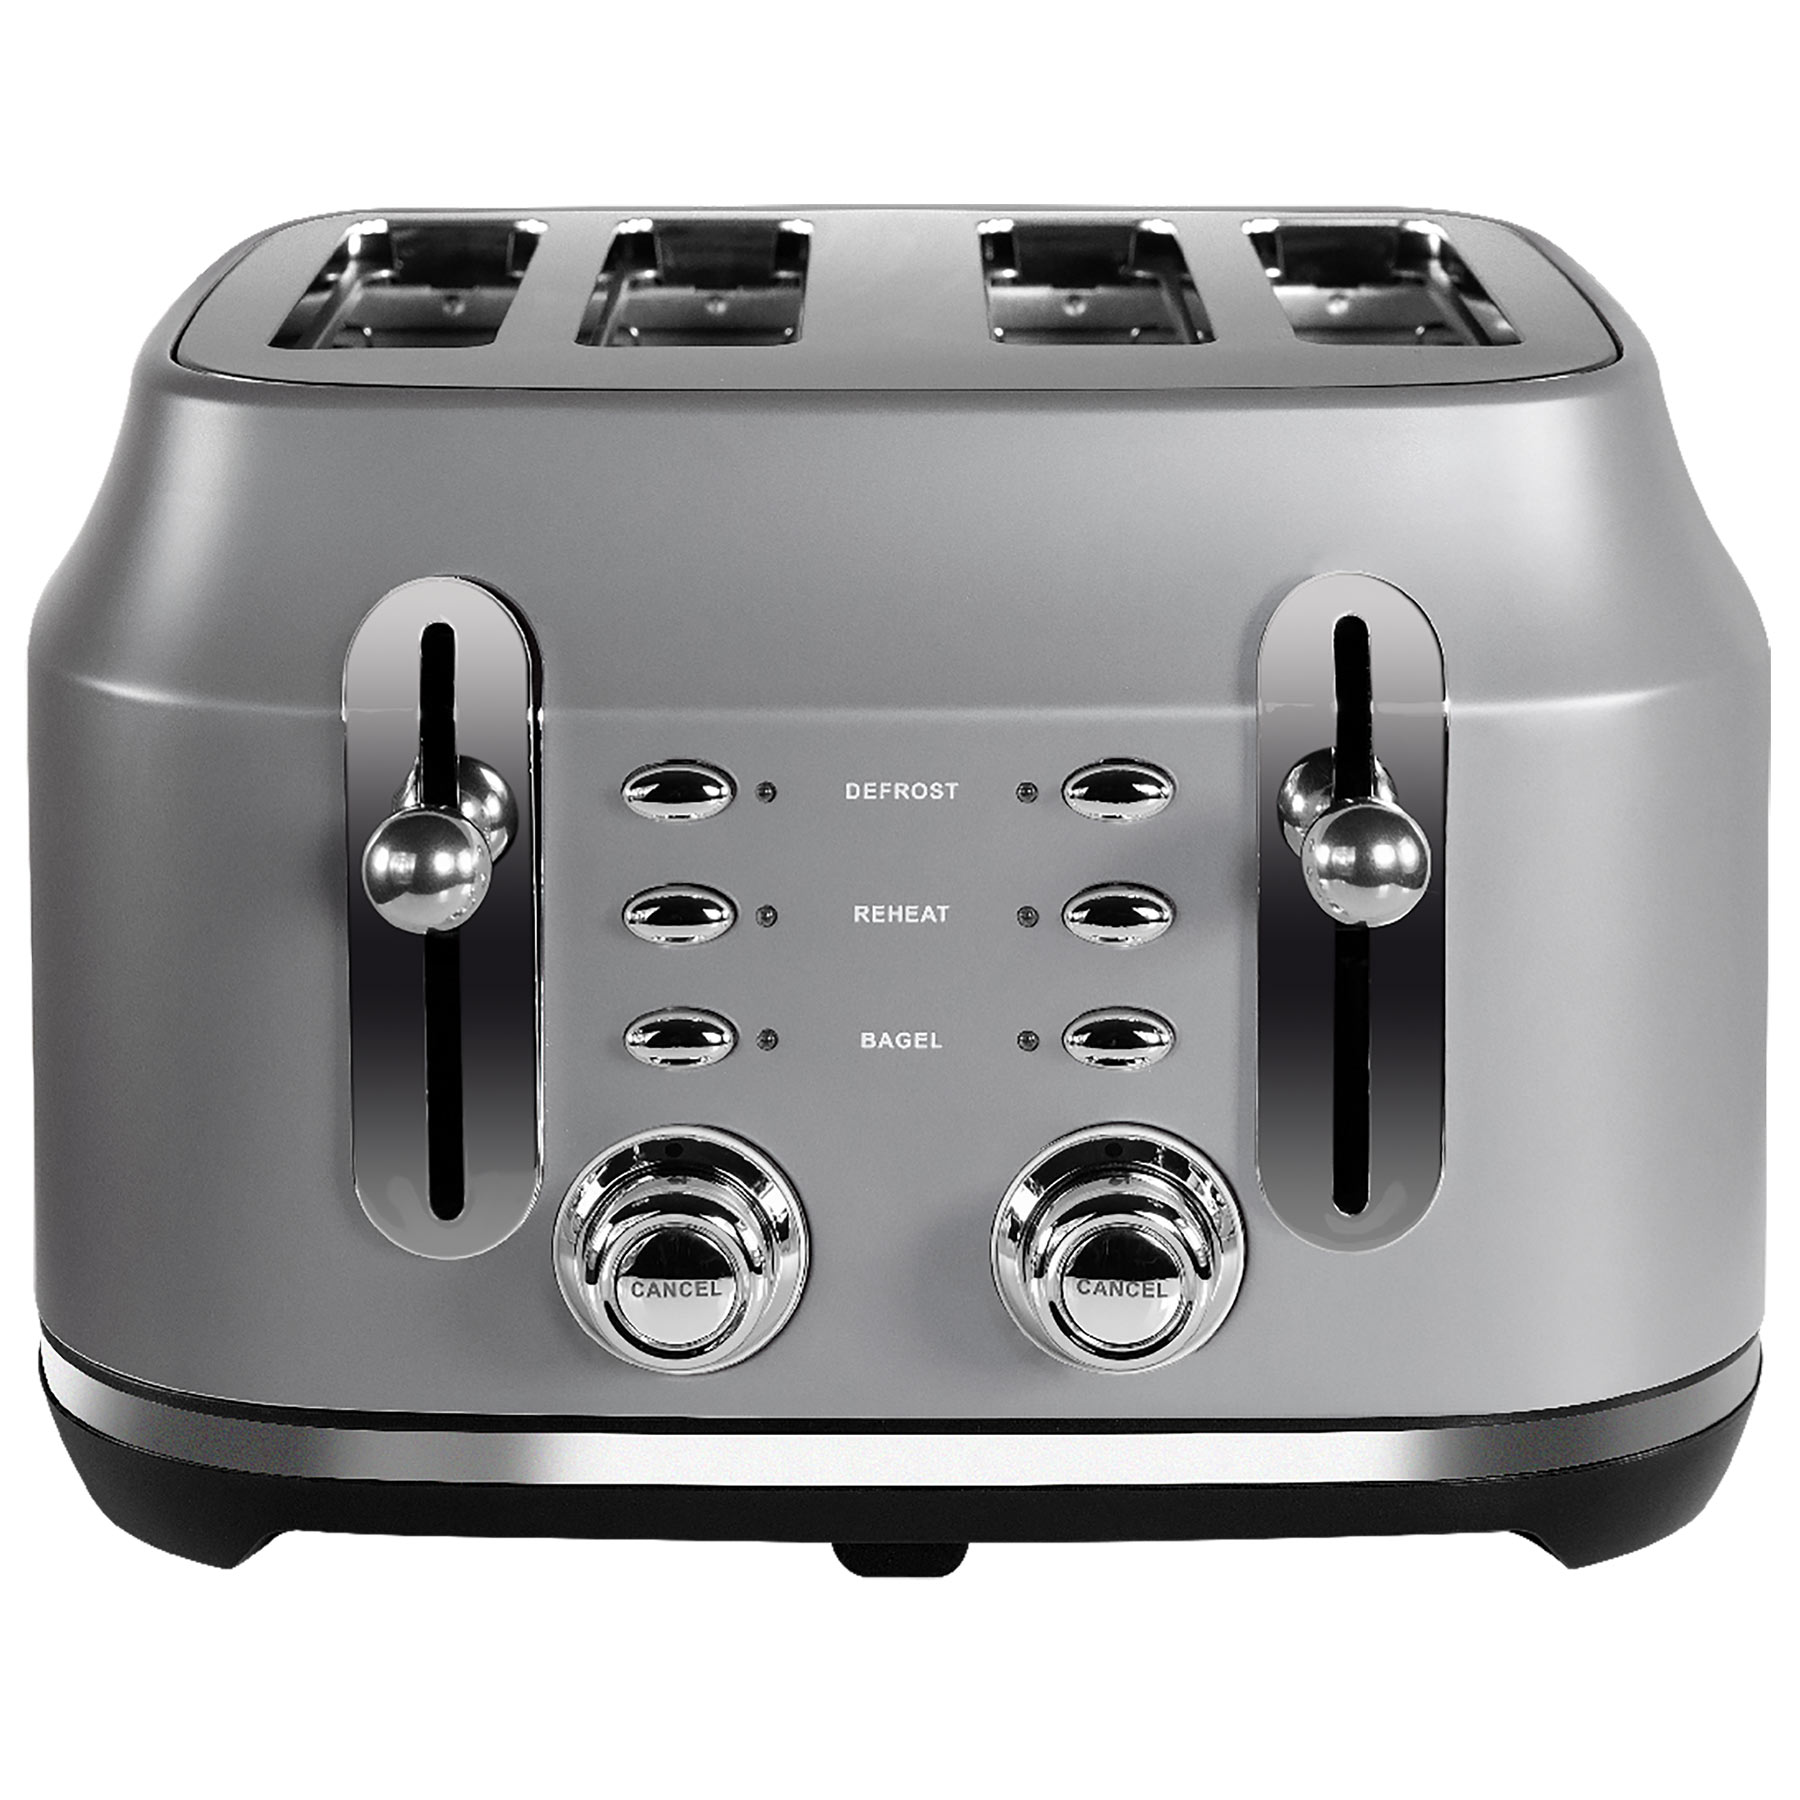 Rangemaster RMCL4S201GY Classic 4 Slice Toaster in Grey